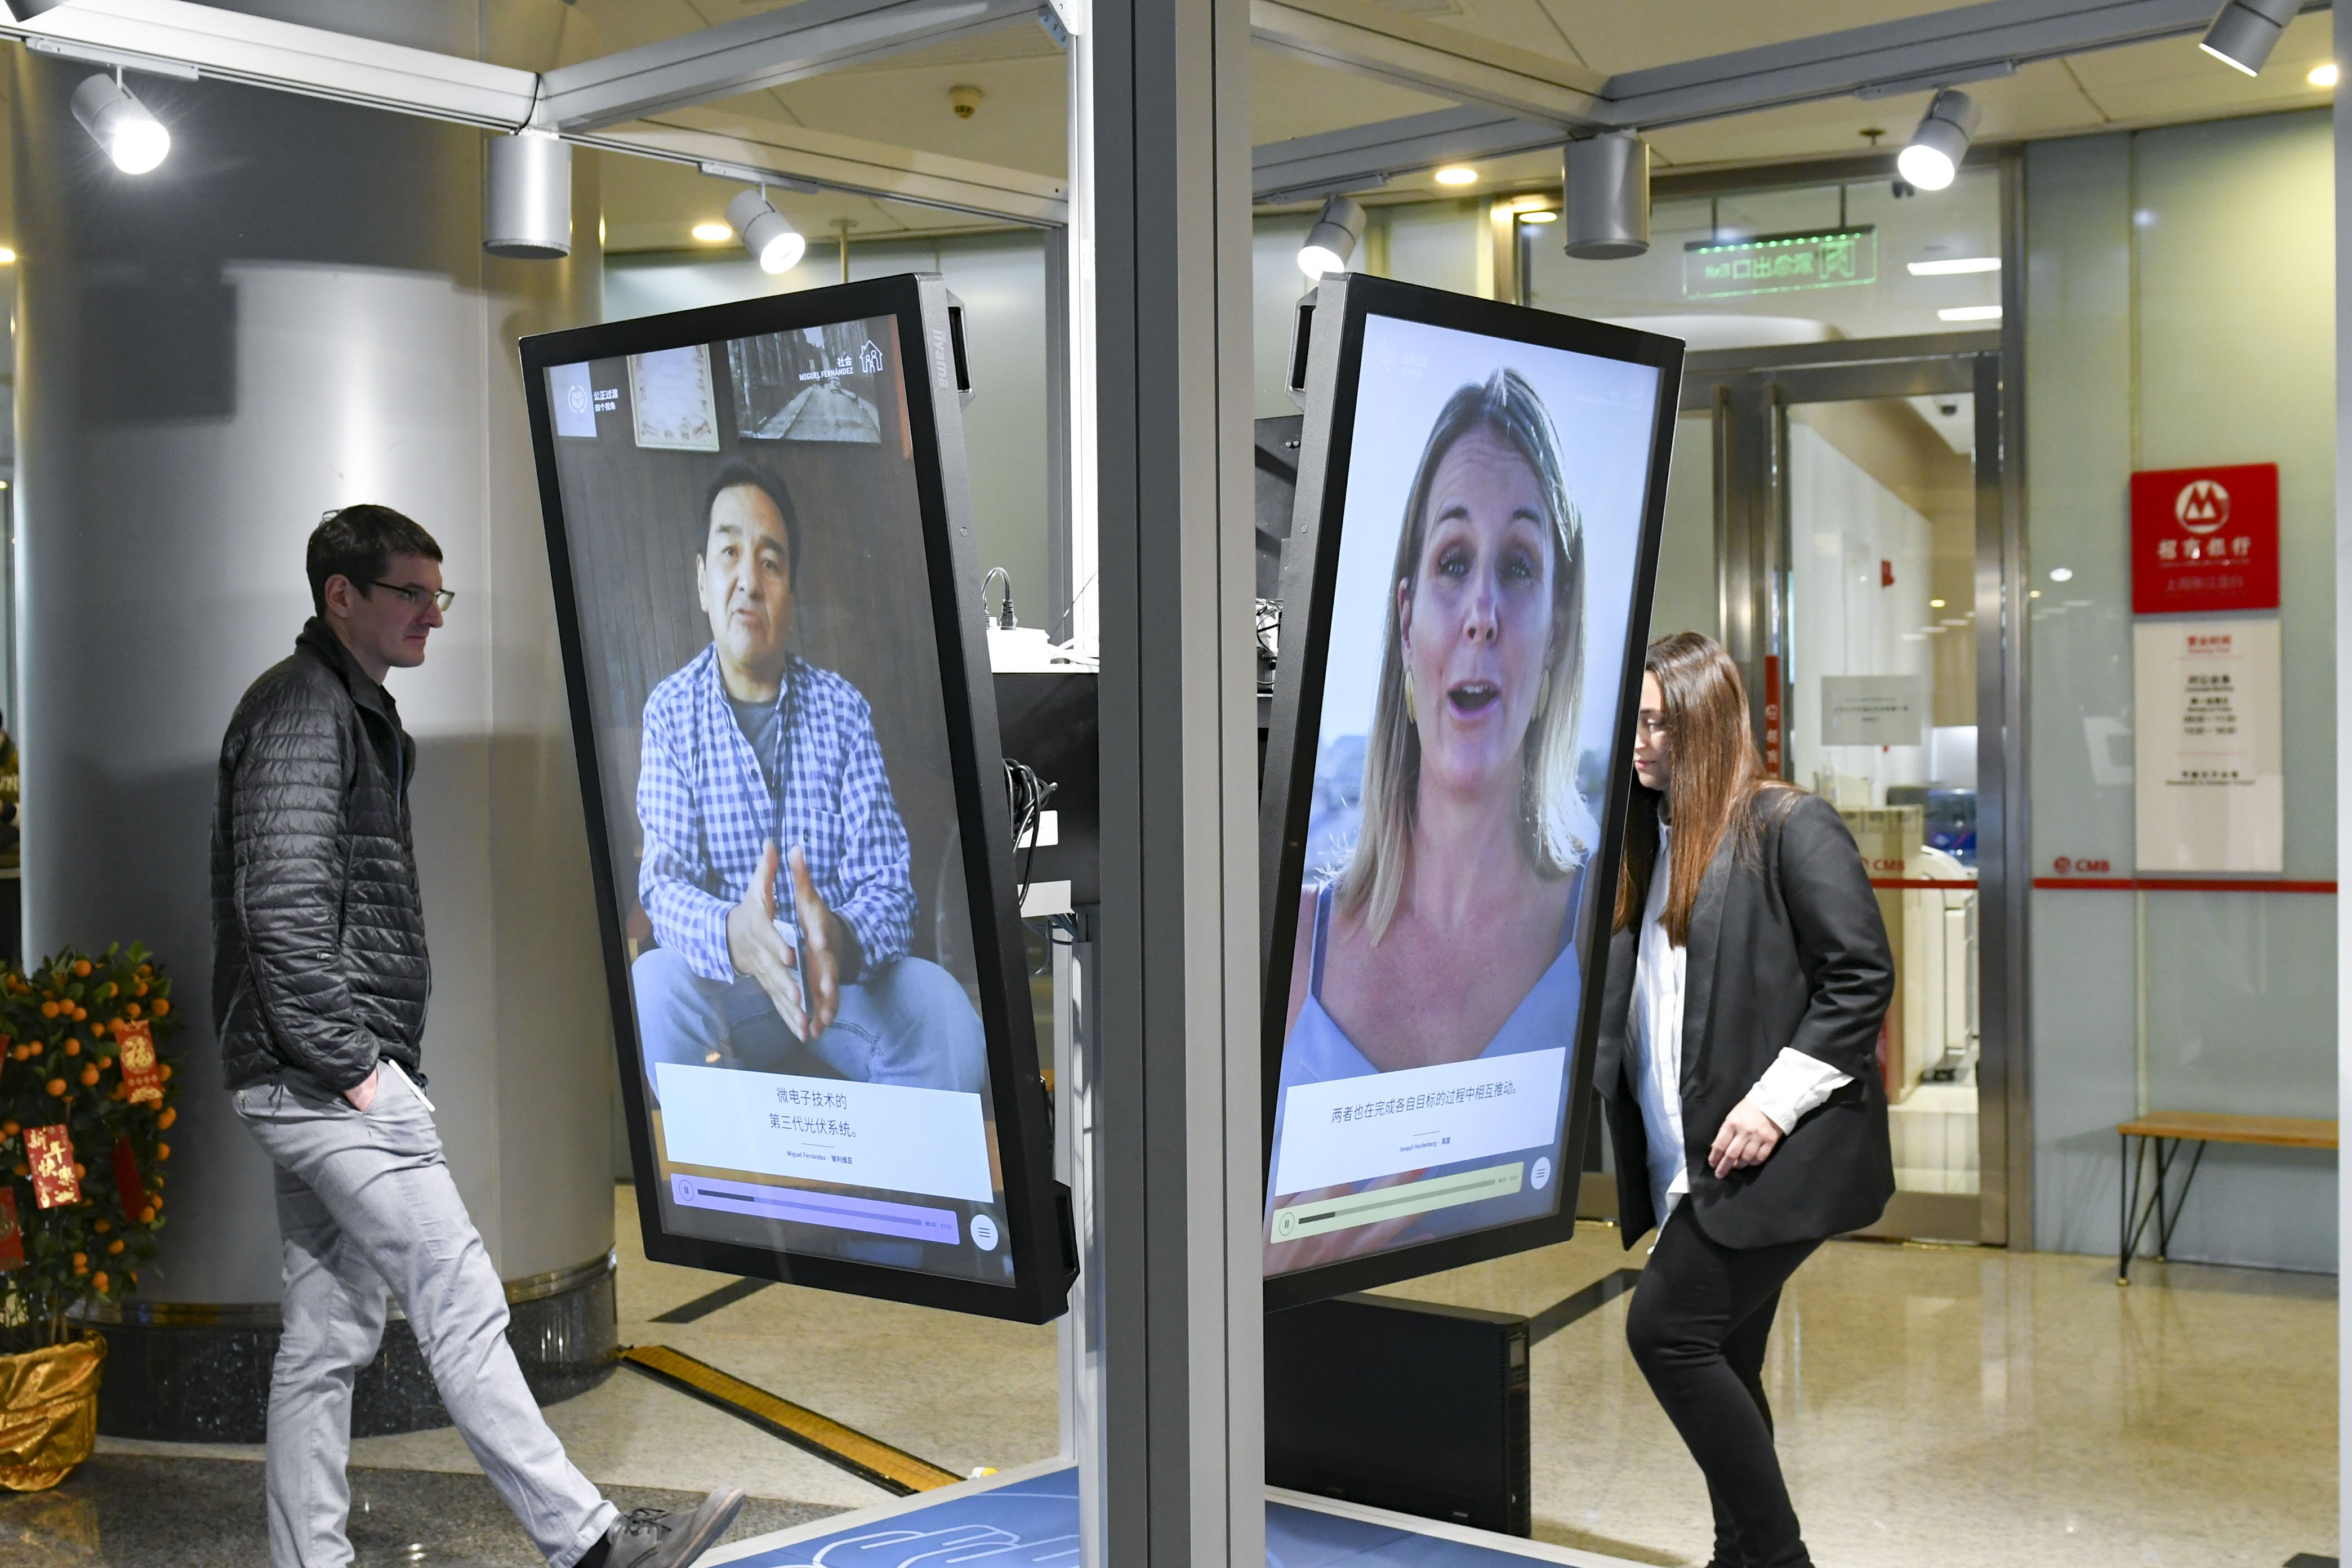 A man and a woman at the station "Just Transition". In the forefront, one can see two screens of the station. On one screen, one can see a man talking, on the other one there is a woman talking. January 2021.